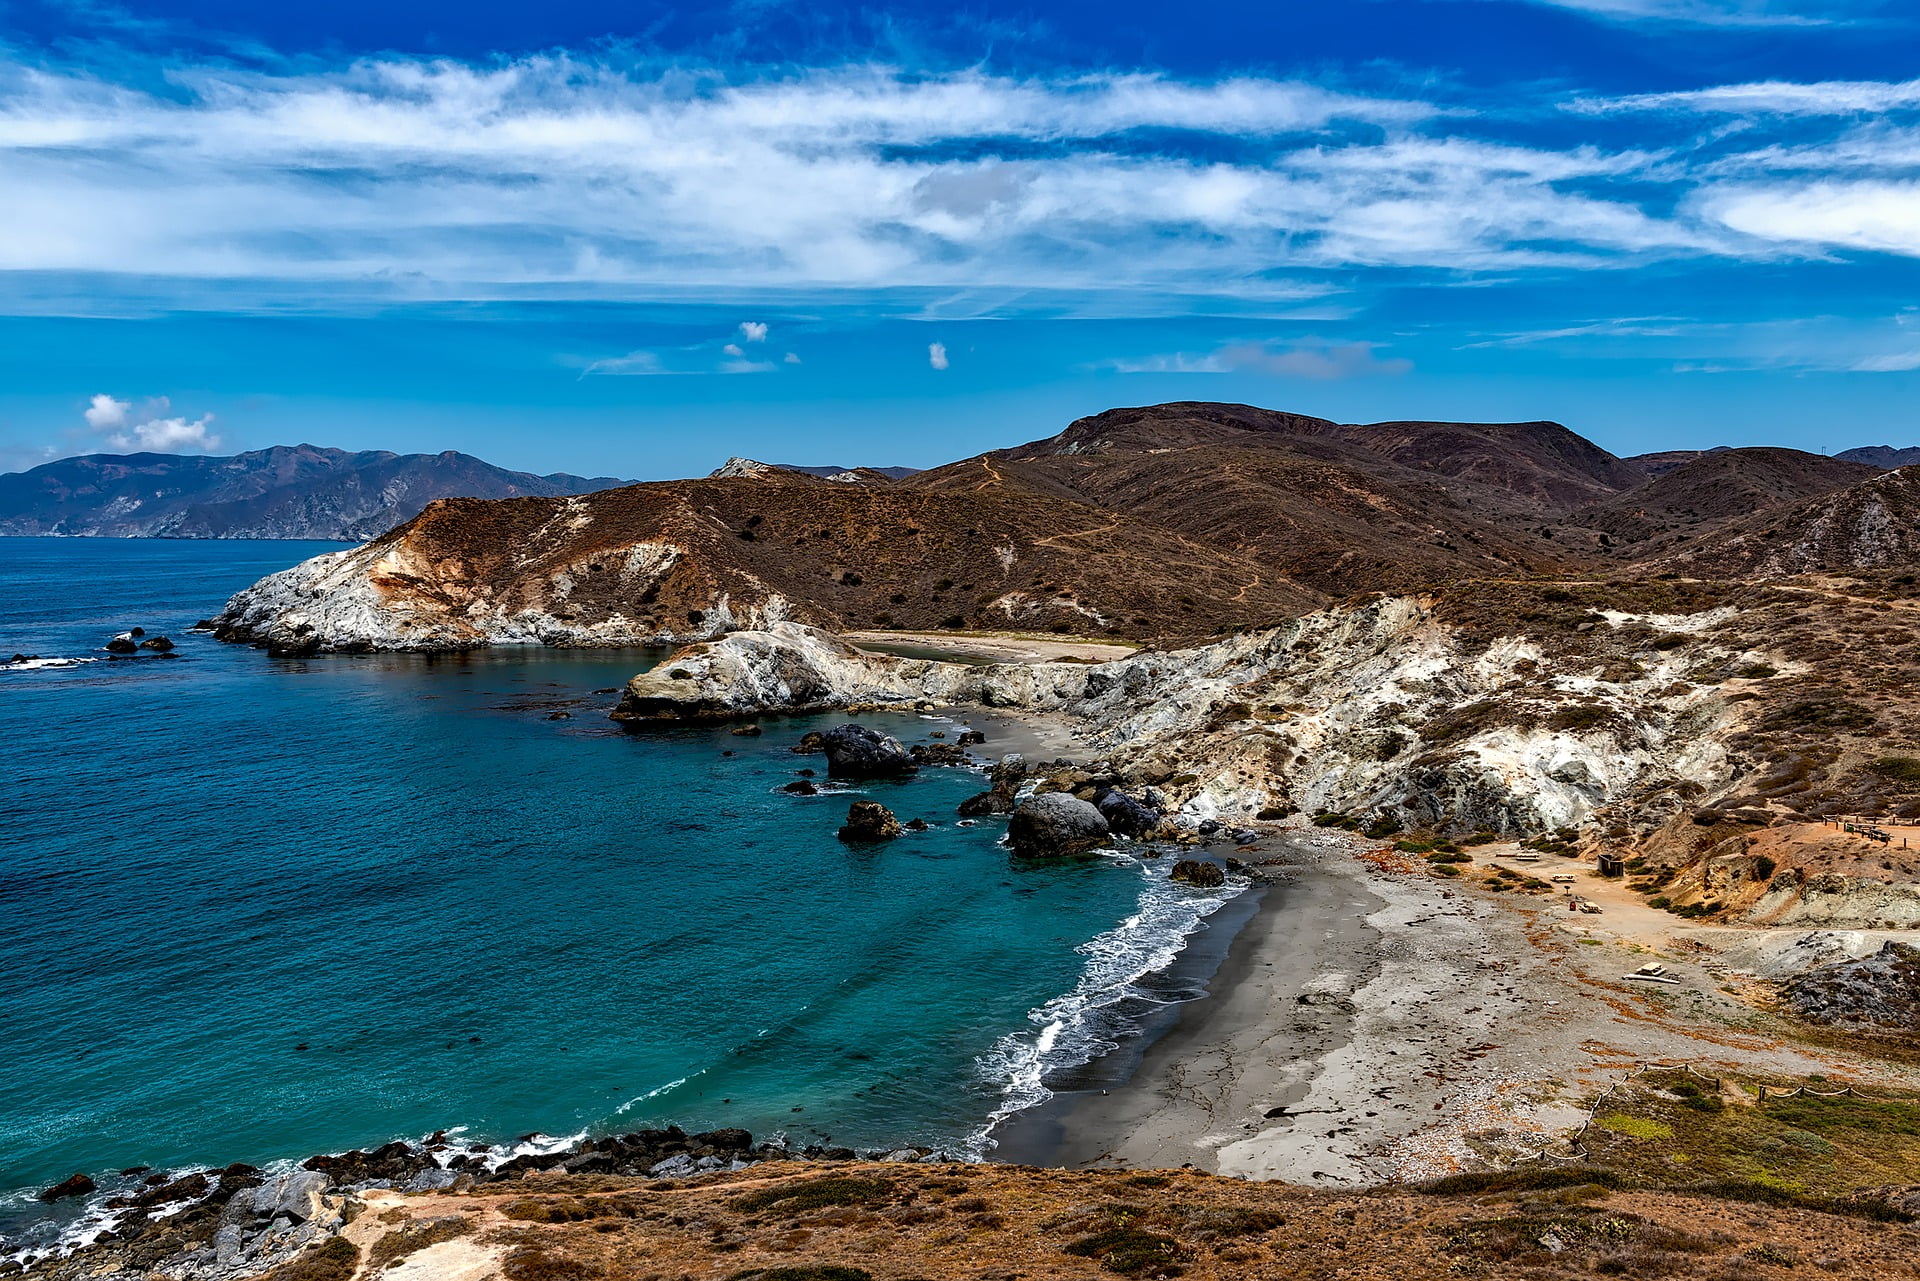 What Is Special About Santa Catalina Island?